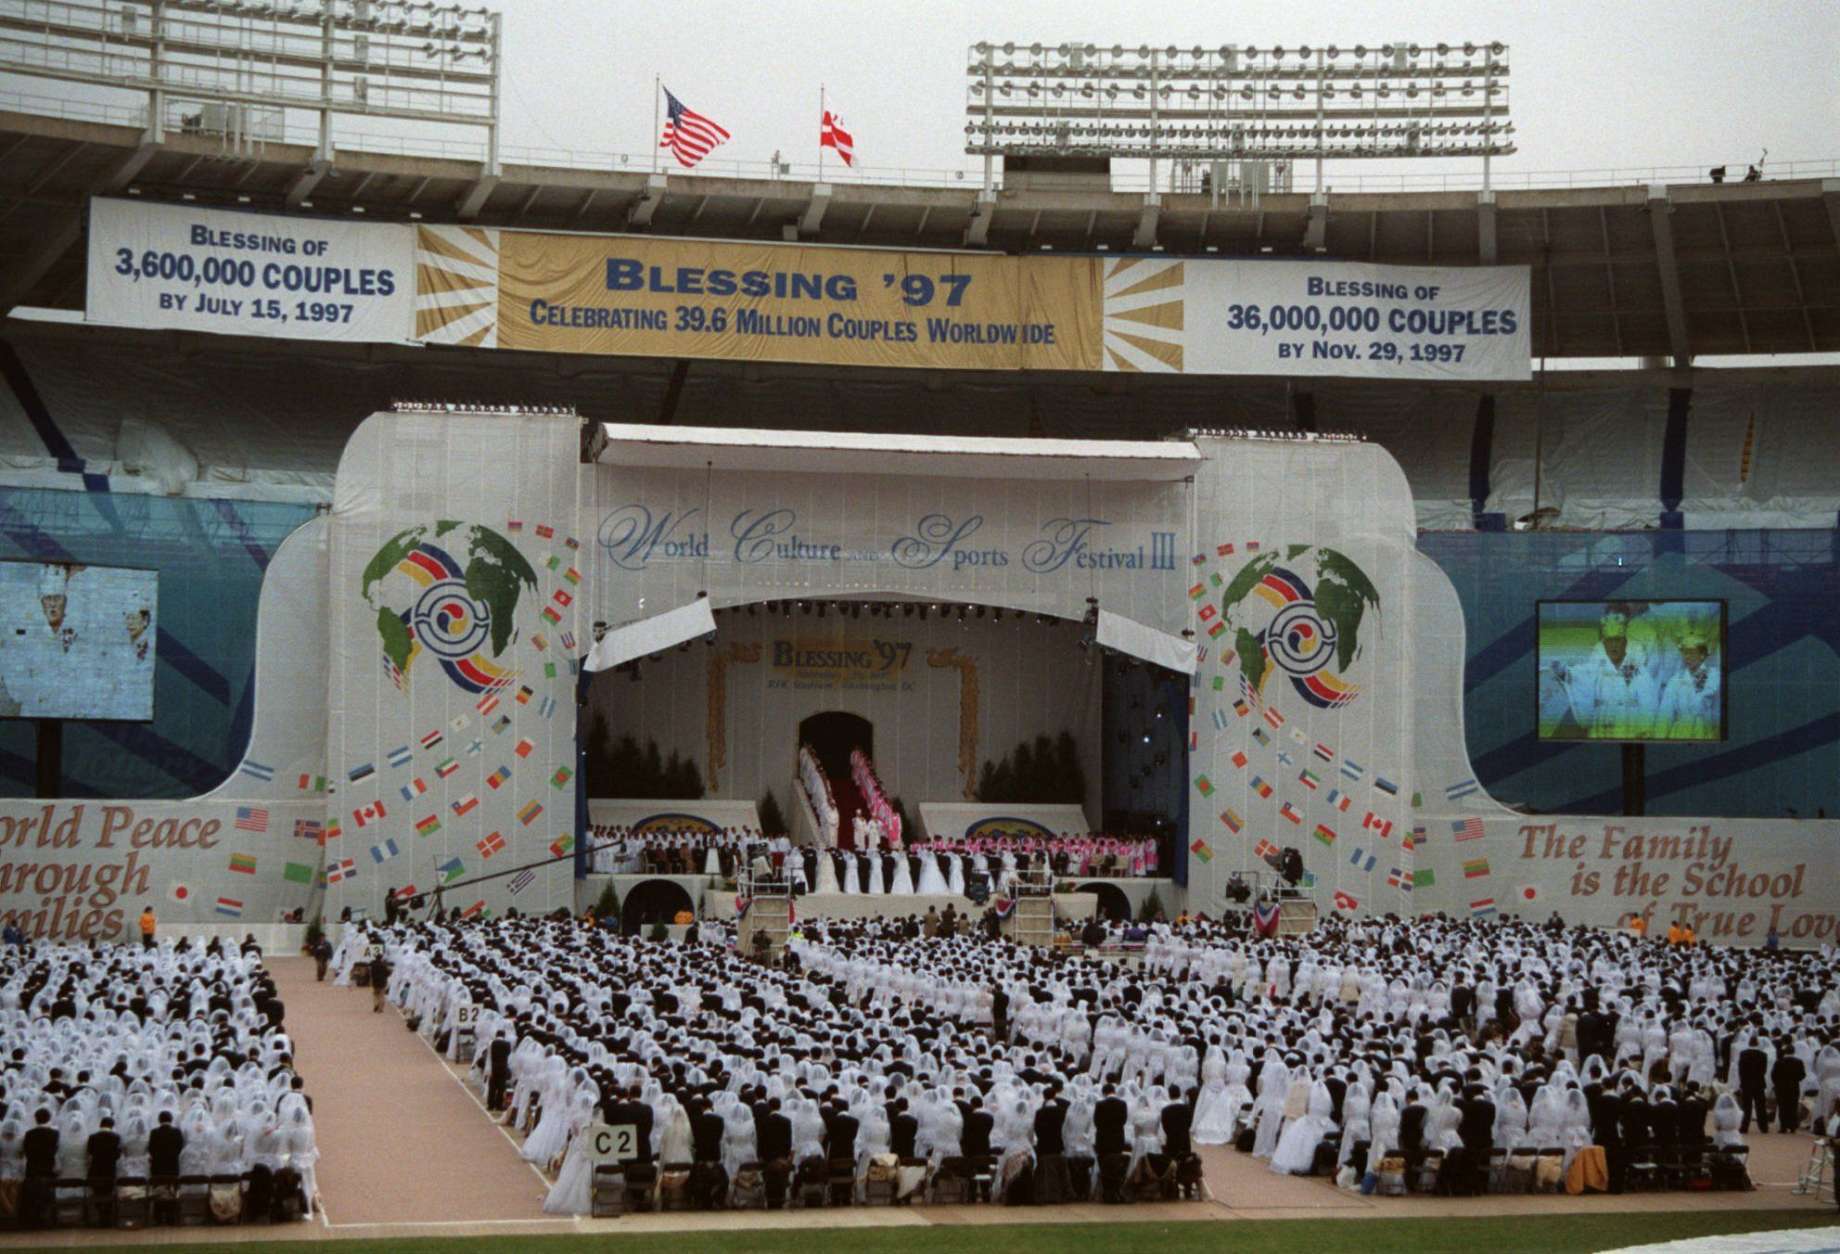 Some of the 28,000 couples participating in a marriage affirmation ceremony officiated by the Rev. and Mrs. Sun Myung Moon, founders of the Unification Church, stand as the Rev. and Mrs. Moon arrive on stage at Robert F. Kennedy Stadium Saturday, Nov. 29, 1997, in Washington. (AP Photo/Karin Cooper)